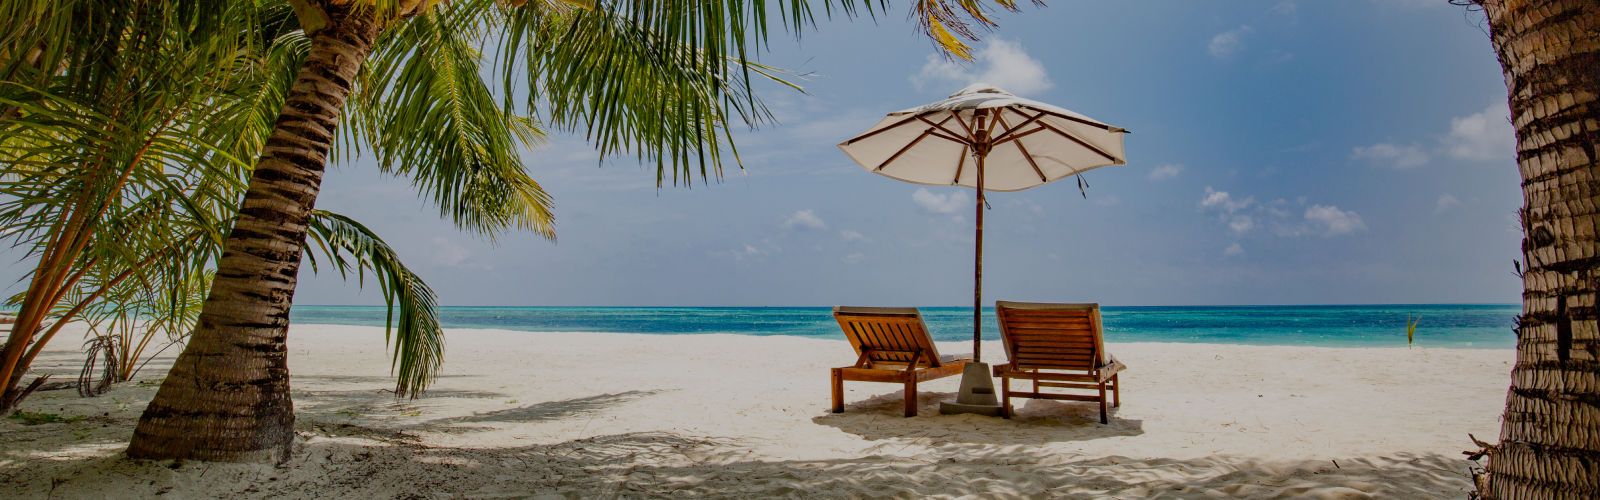 Two chairs with white umbrella on a sandy beach inbetween two palm trees.